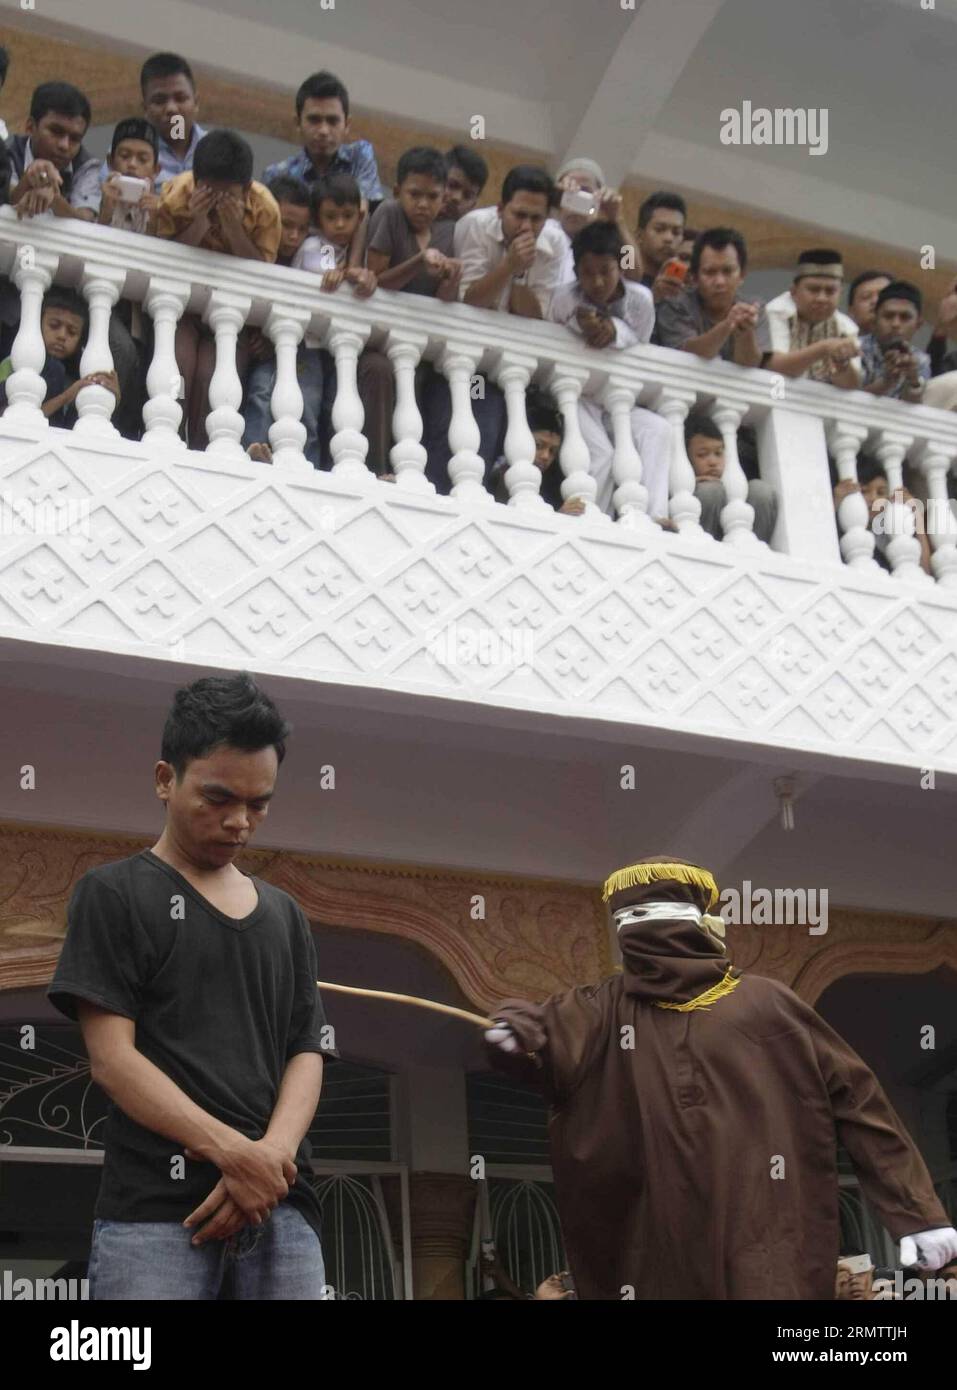 (140919) -- ACEH, Sept. 19, 2014. -- A Sharia law official whips a man convicted of gambling with a rattan cane during a public caning in Aceh, Indonesia, on Sept. 19, 2014. The provincial administration of Aceh, in the north of the Indonesian island of Sumatra, has approved a law called the Qanun Jinayat implemented a version of Islamic Sharia law since 2001. ) INDONESIA-ACEH-SHARIA LAW Junaidi PUBLICATIONxNOTxINxCHN   Aceh Sept 19 2014 a Sharia Law Official  a Man convicted of Gambling With a Rattan Cane during a Public  in Aceh Indonesia ON Sept 19 2014 The Provincial Administration of Aceh Stock Photo